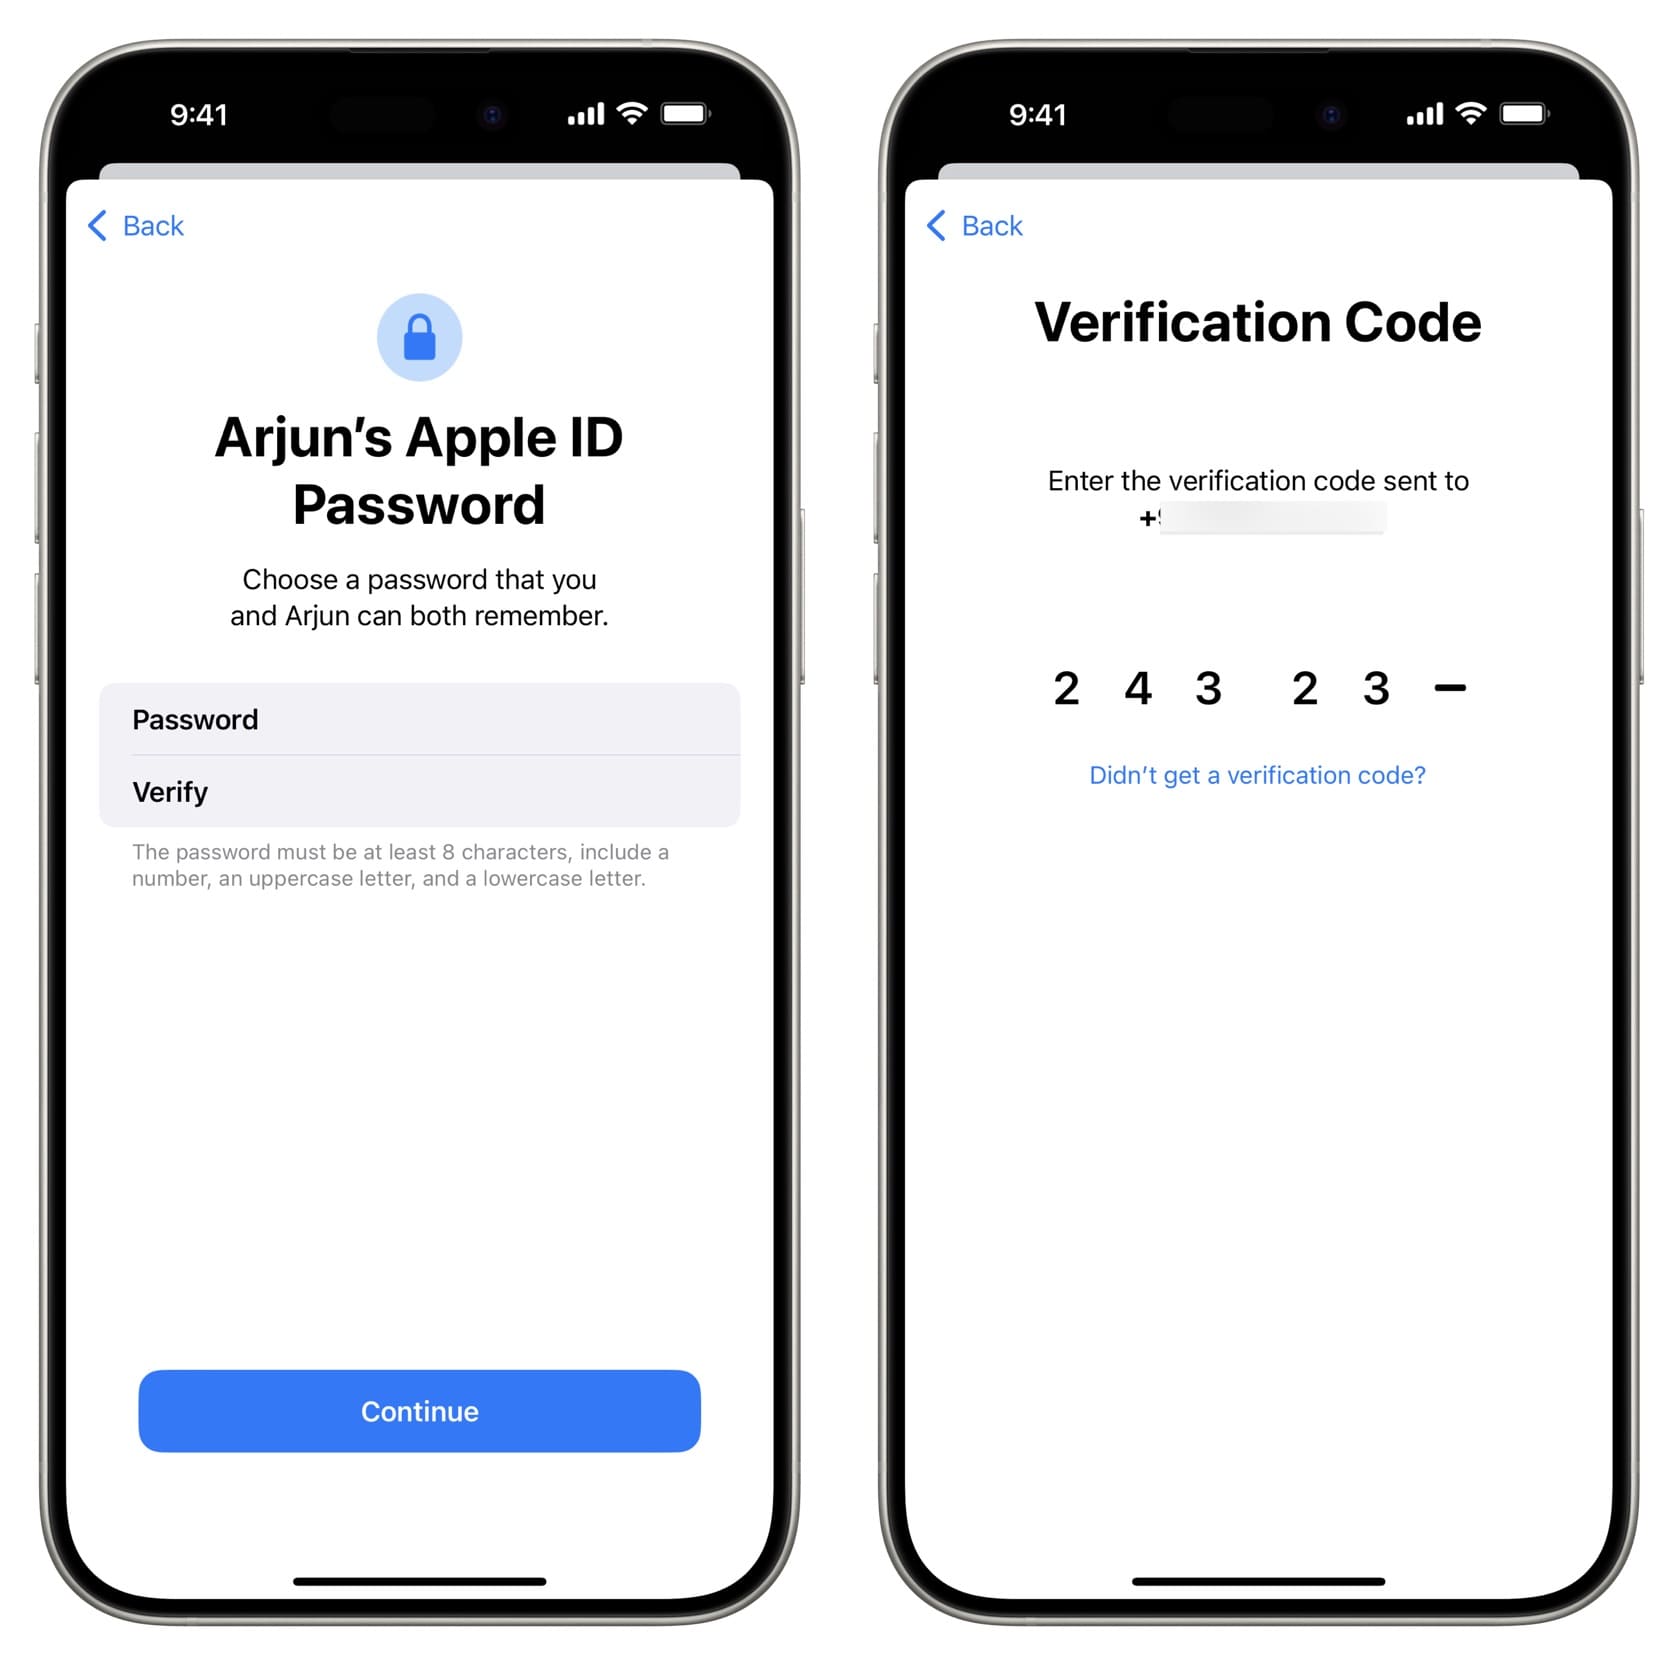 Enter password for child Apple ID and verify with code sent to a phone number